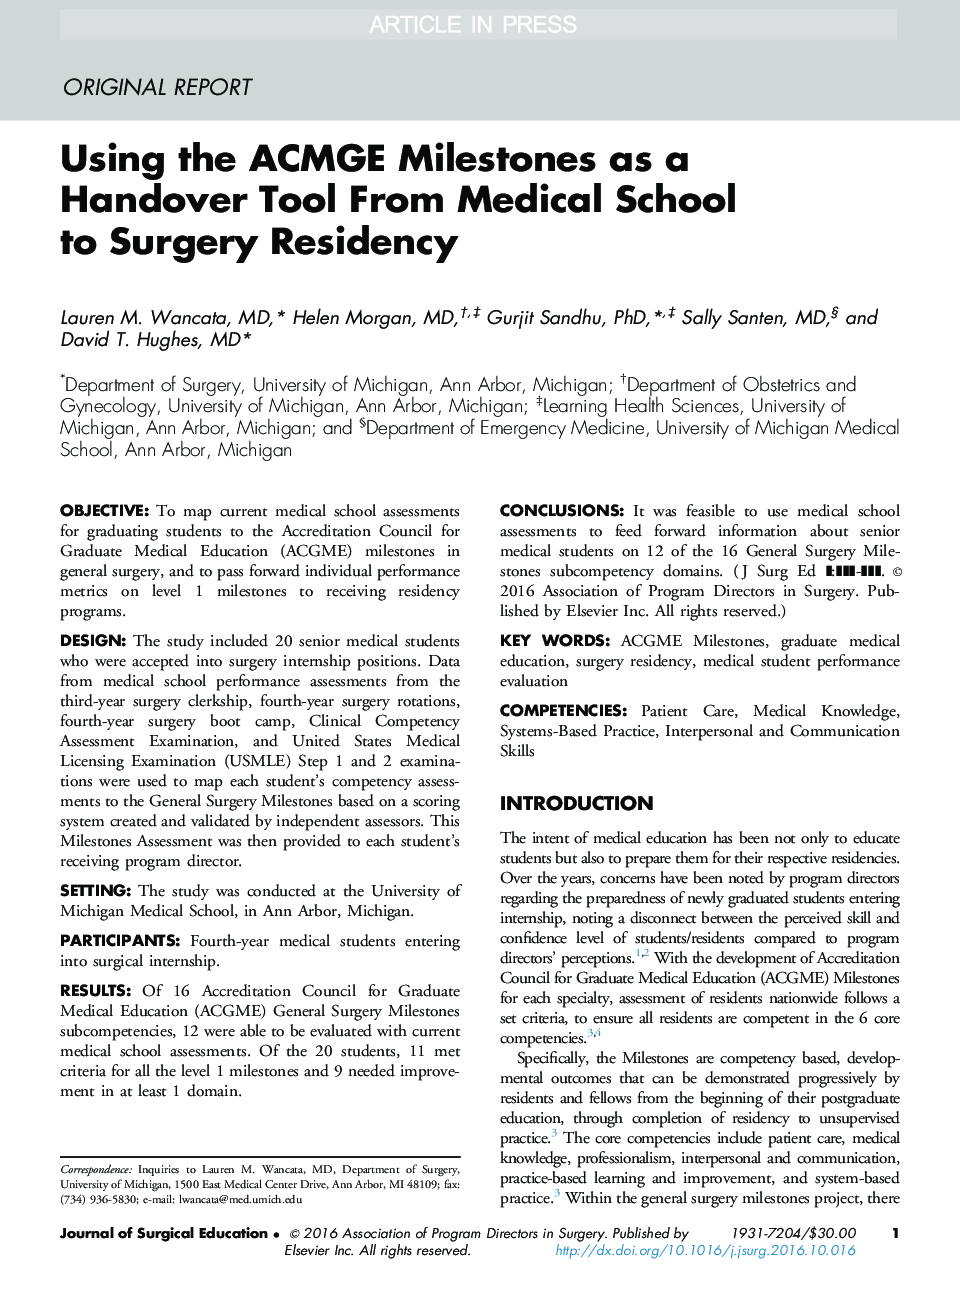 Using the ACMGE Milestones as a Handover Tool From Medical School to Surgery Residency